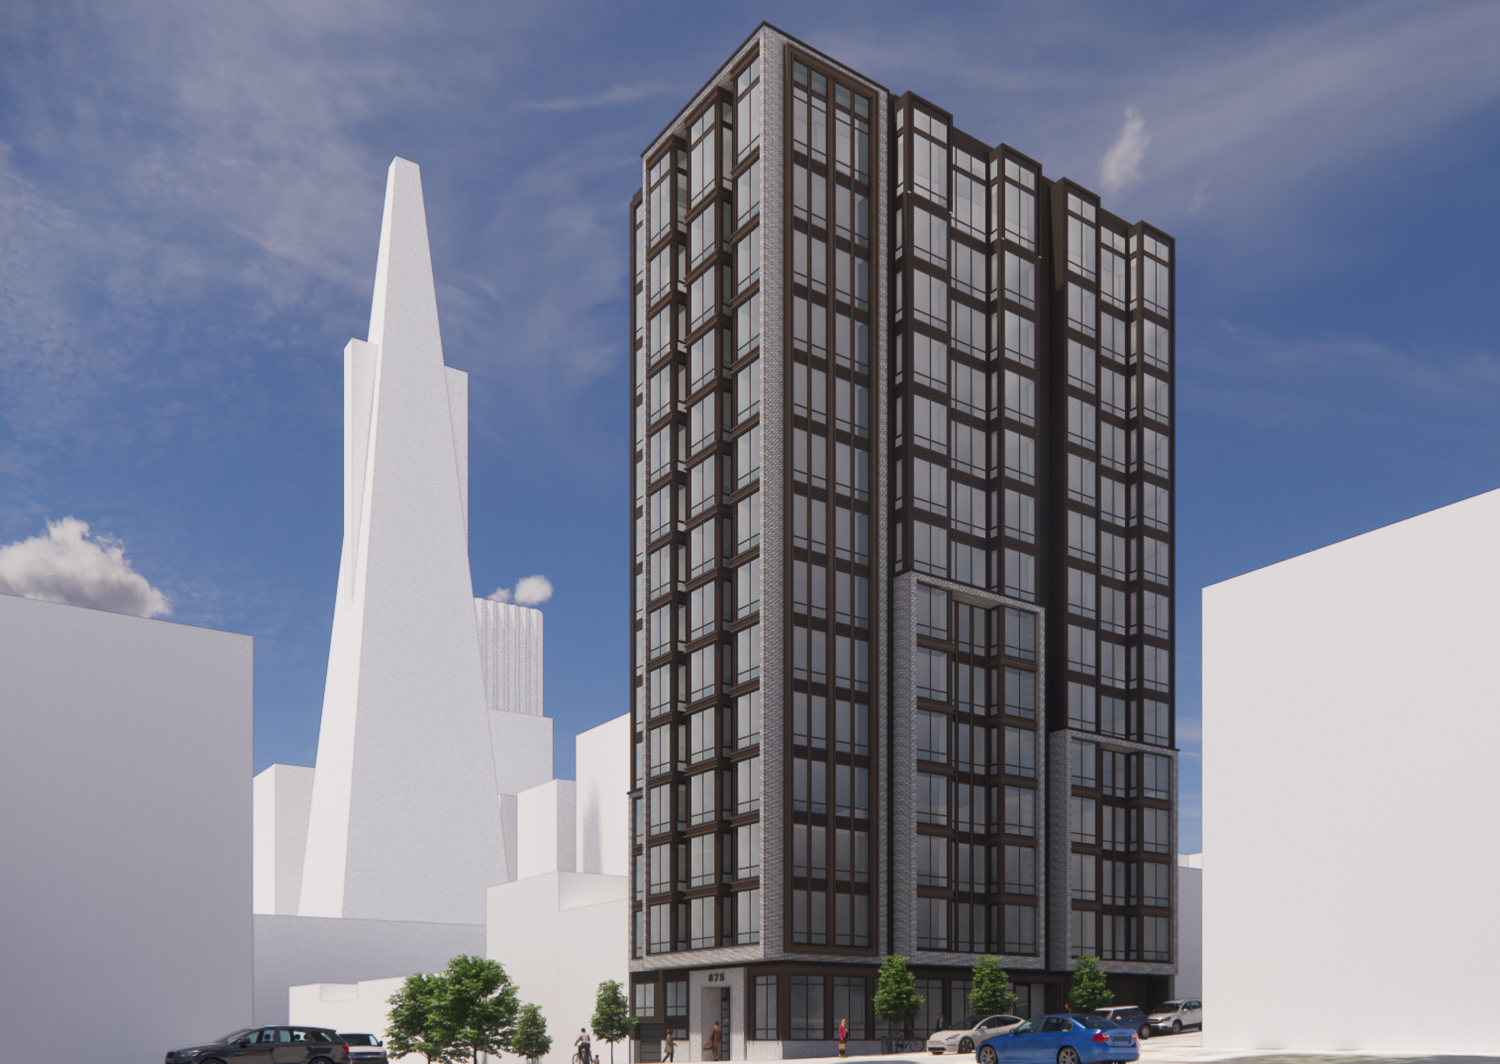 875 Sansome Street using AB1287 to rise 14 floors, rendering by BDE Architecture